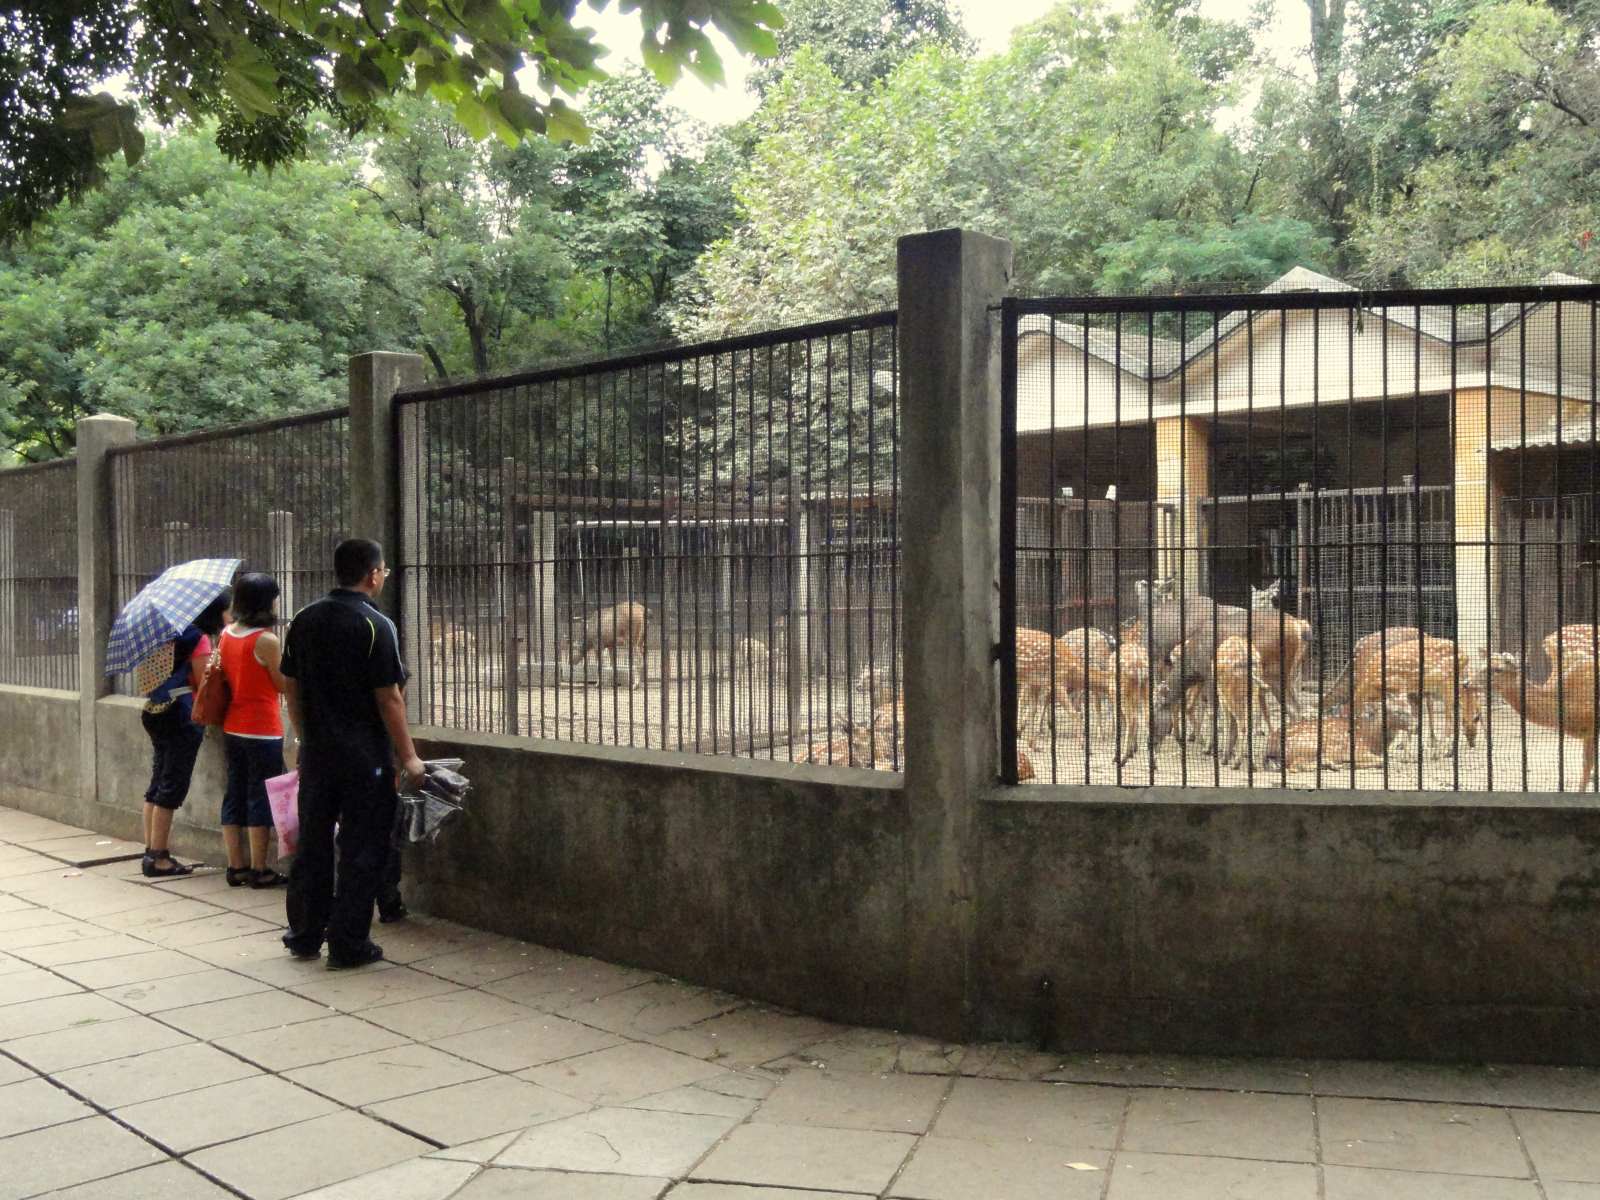 18-intriguing-facts-about-kunming-zoo